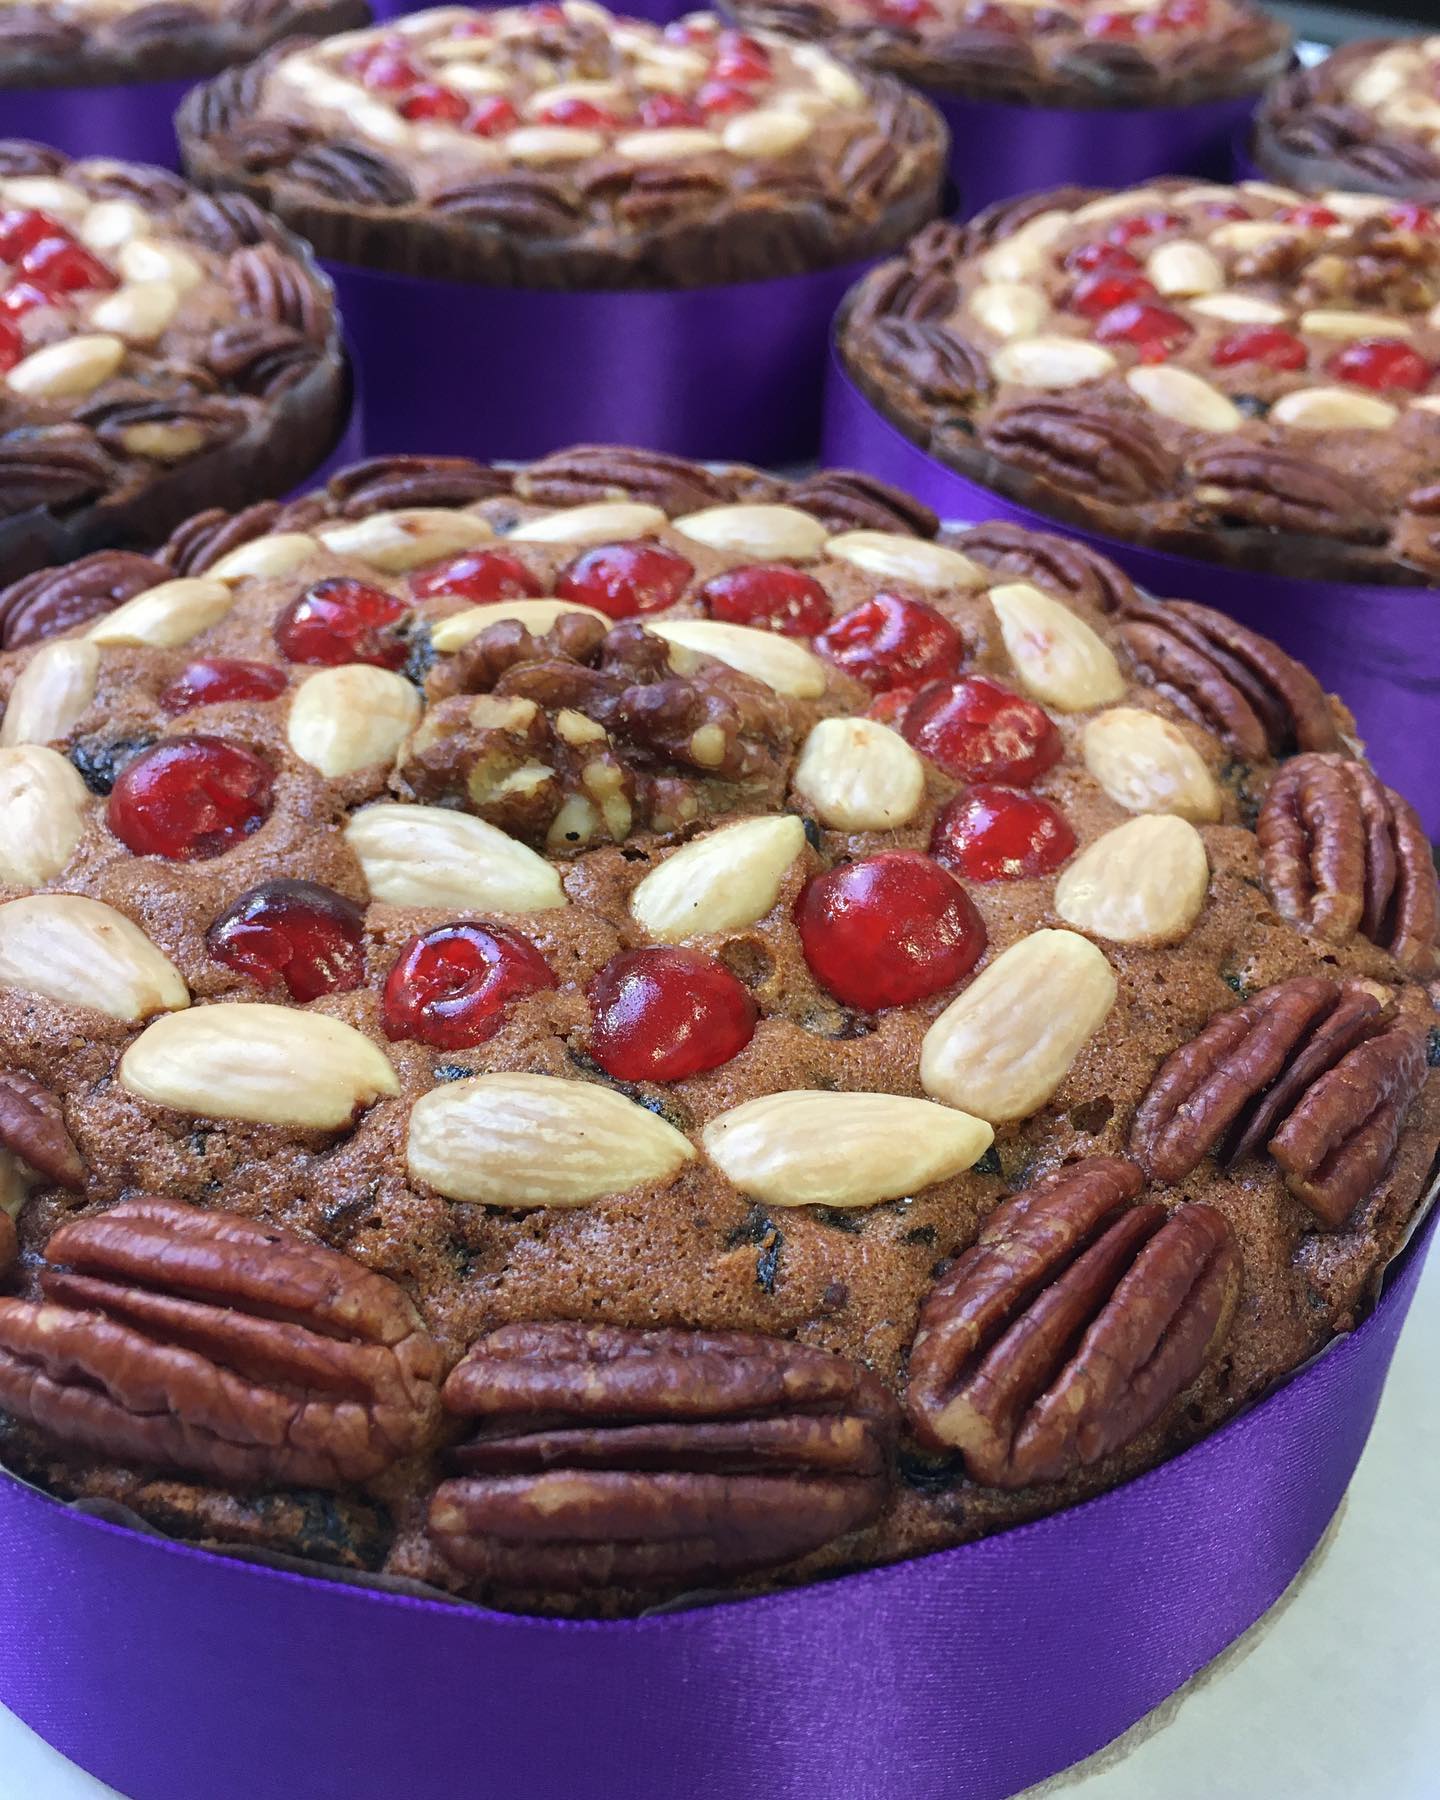 Dundee Cake - Cherry & Walnut - No Peel. For delivery between 17th & 24th December